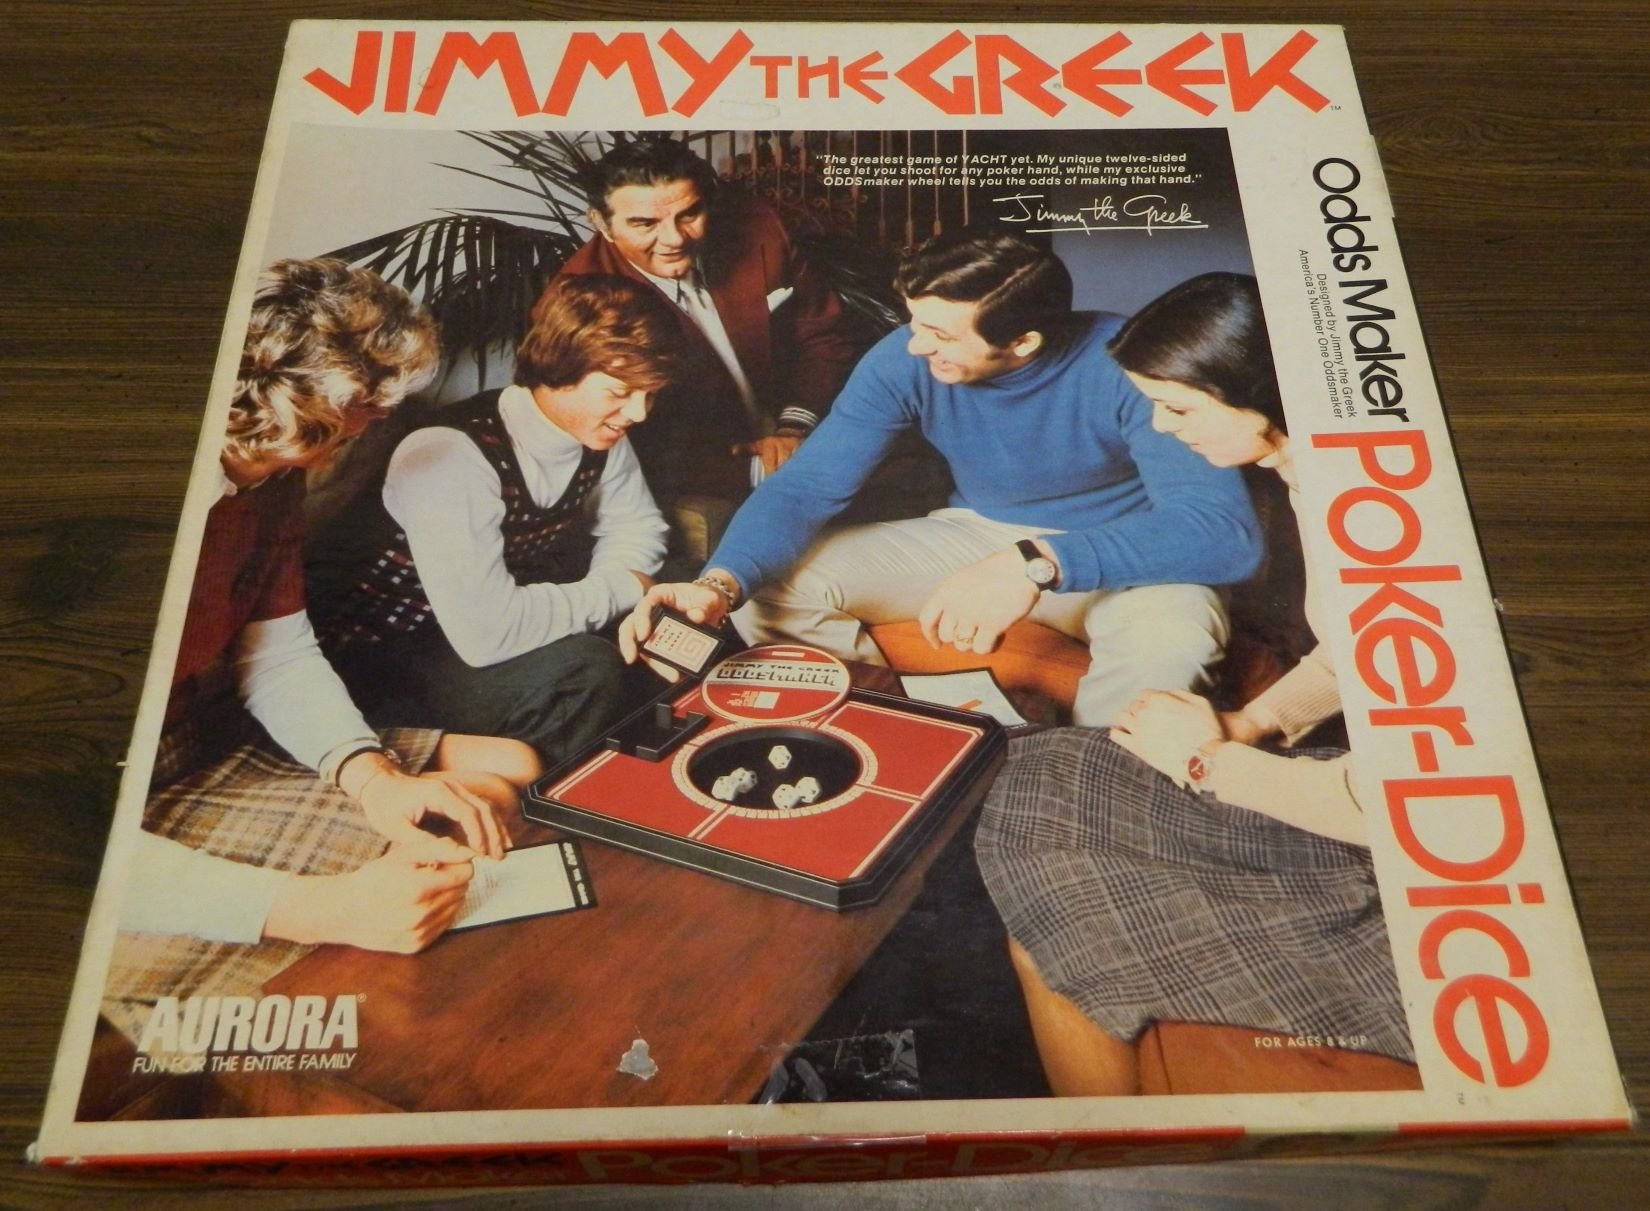 Jimmy the Greek Odds Maker Poker-Dice Board Game Review and Rules